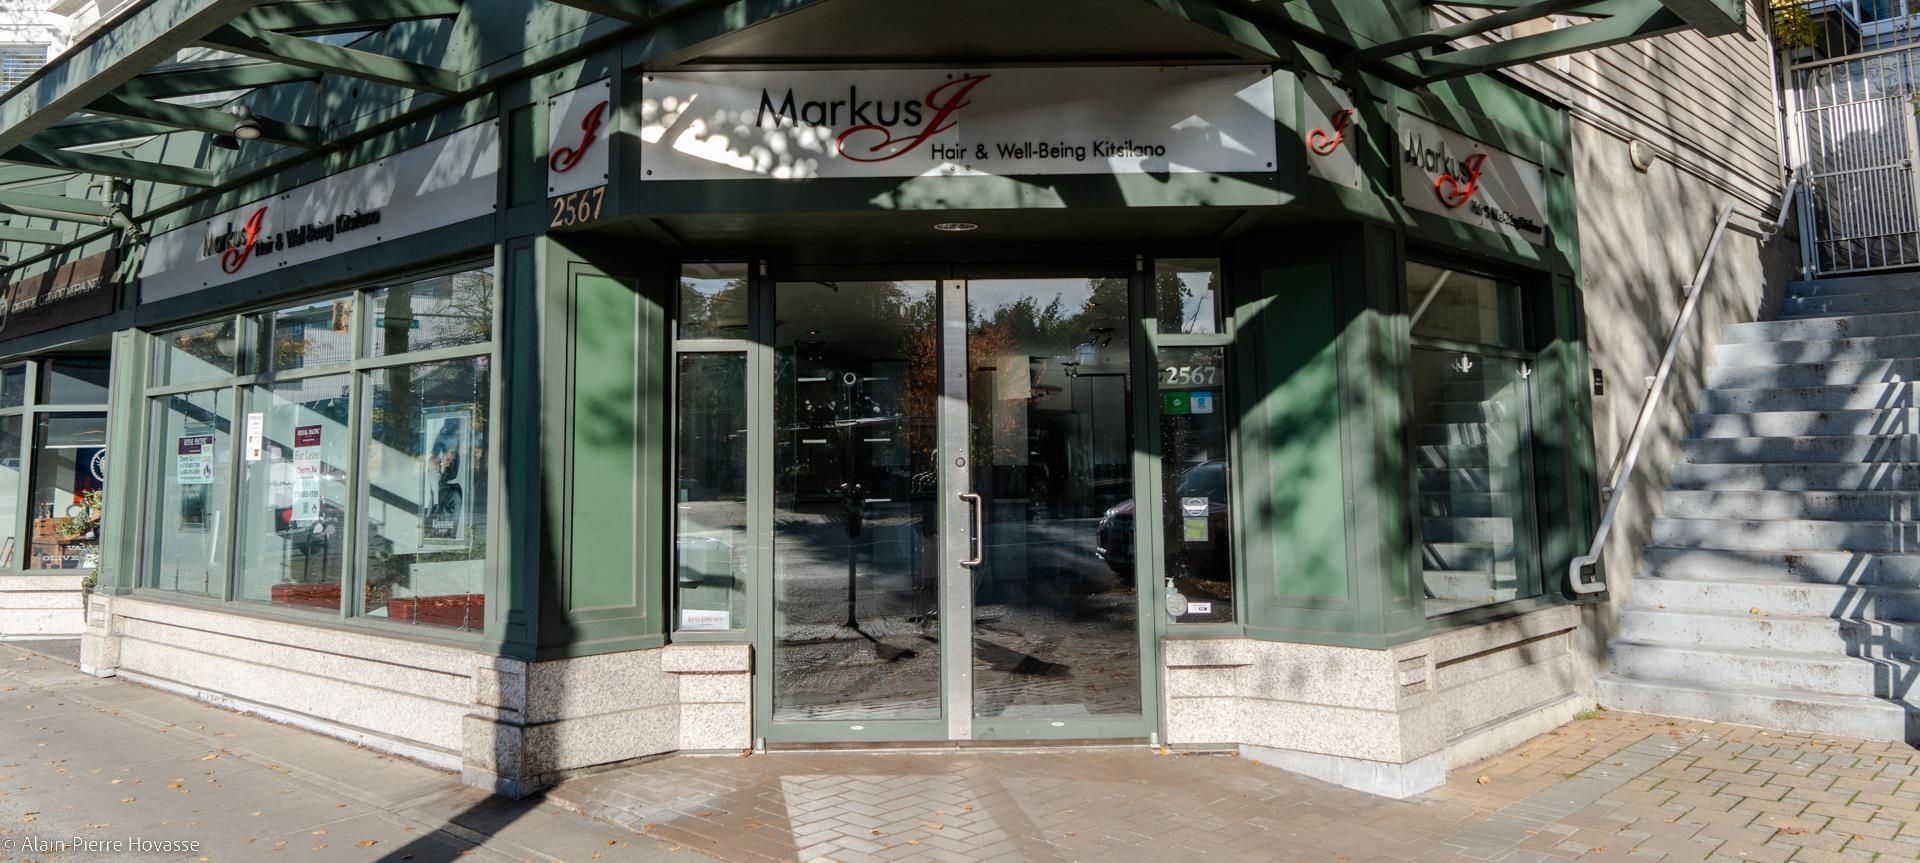 Main Photo: 2567 BROADWAY in Vancouver: Kitsilano Retail for lease (Vancouver West)  : MLS®# C8044076